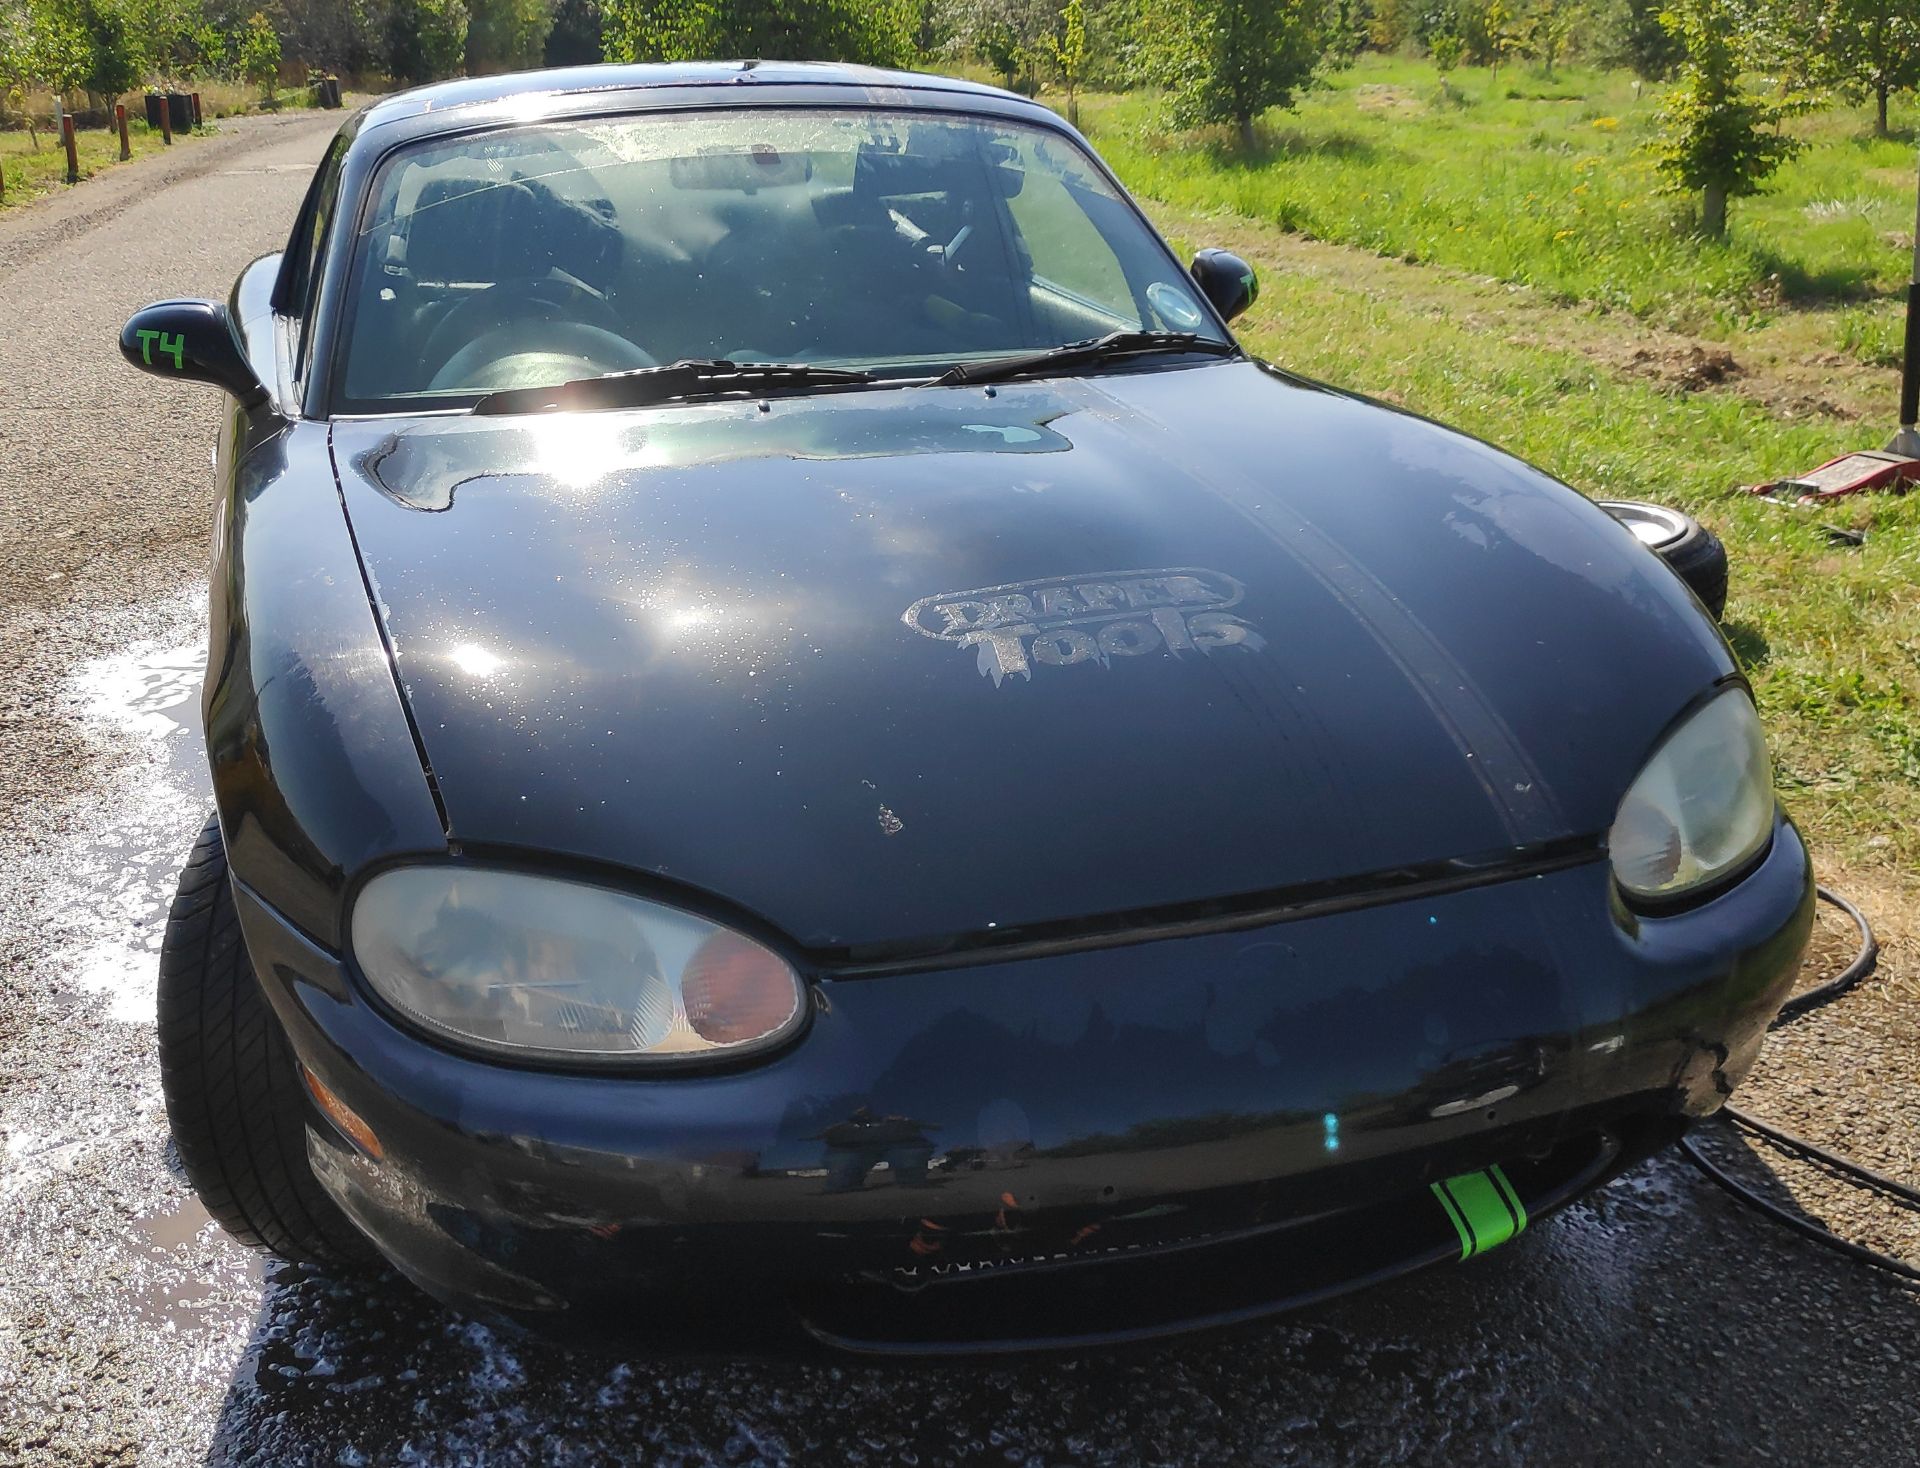 1 x 2000 Mazda MX5 Mk2 Drift Car - Includes 3 Extra Wheels/Tyres - Ref: T4 - CL682 - Location: Bedfo - Image 11 of 77